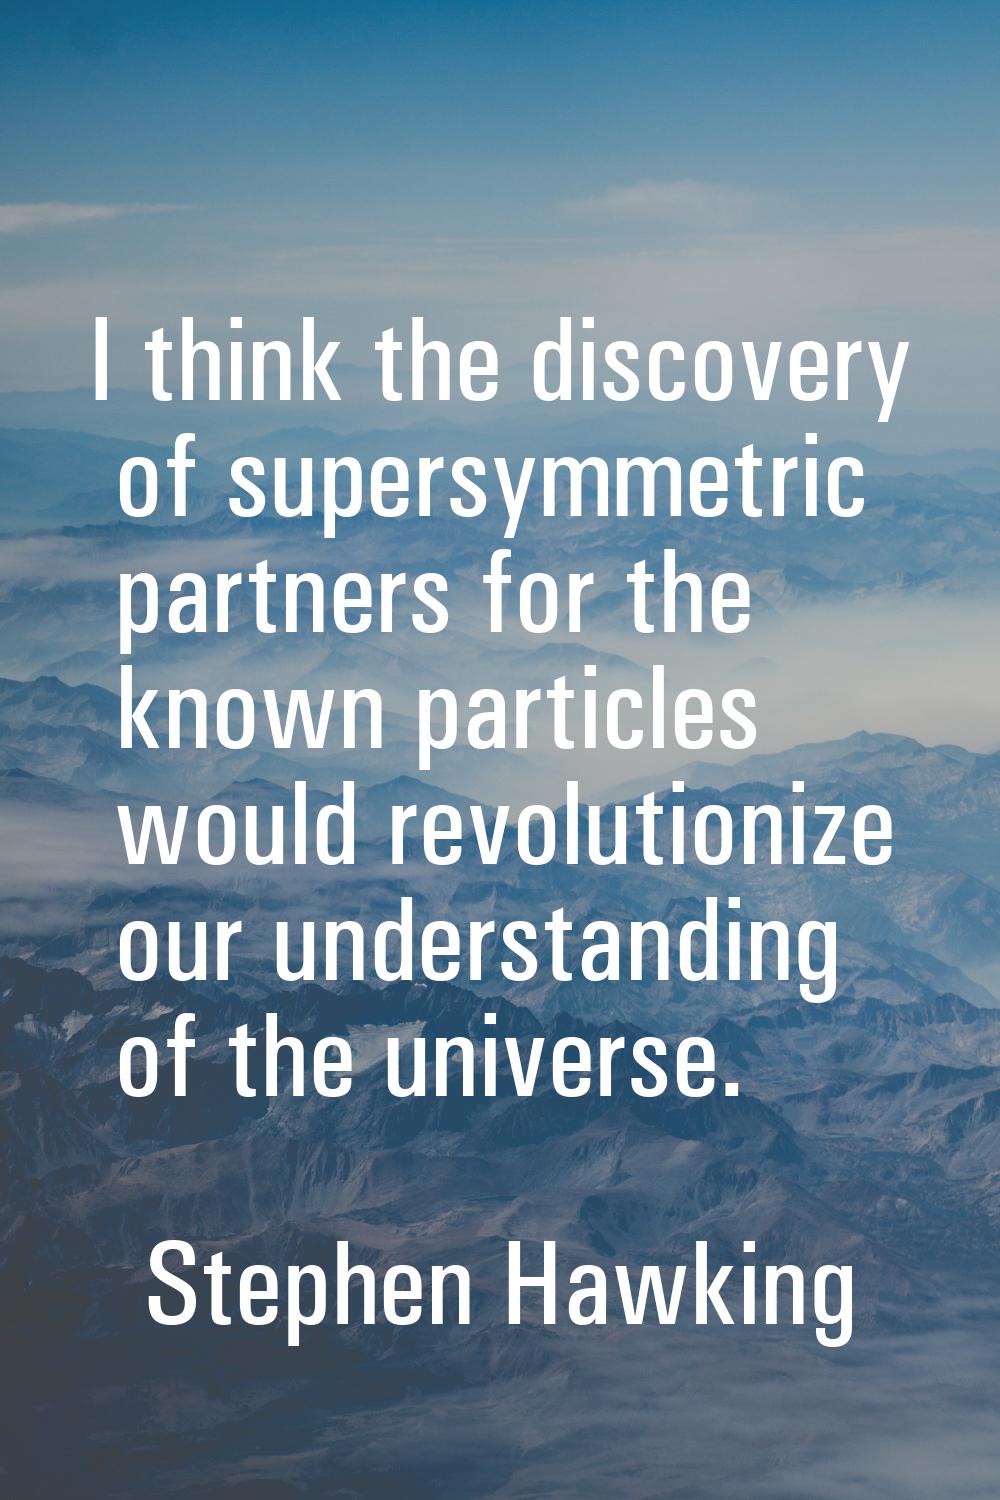 I think the discovery of supersymmetric partners for the known particles would revolutionize our un